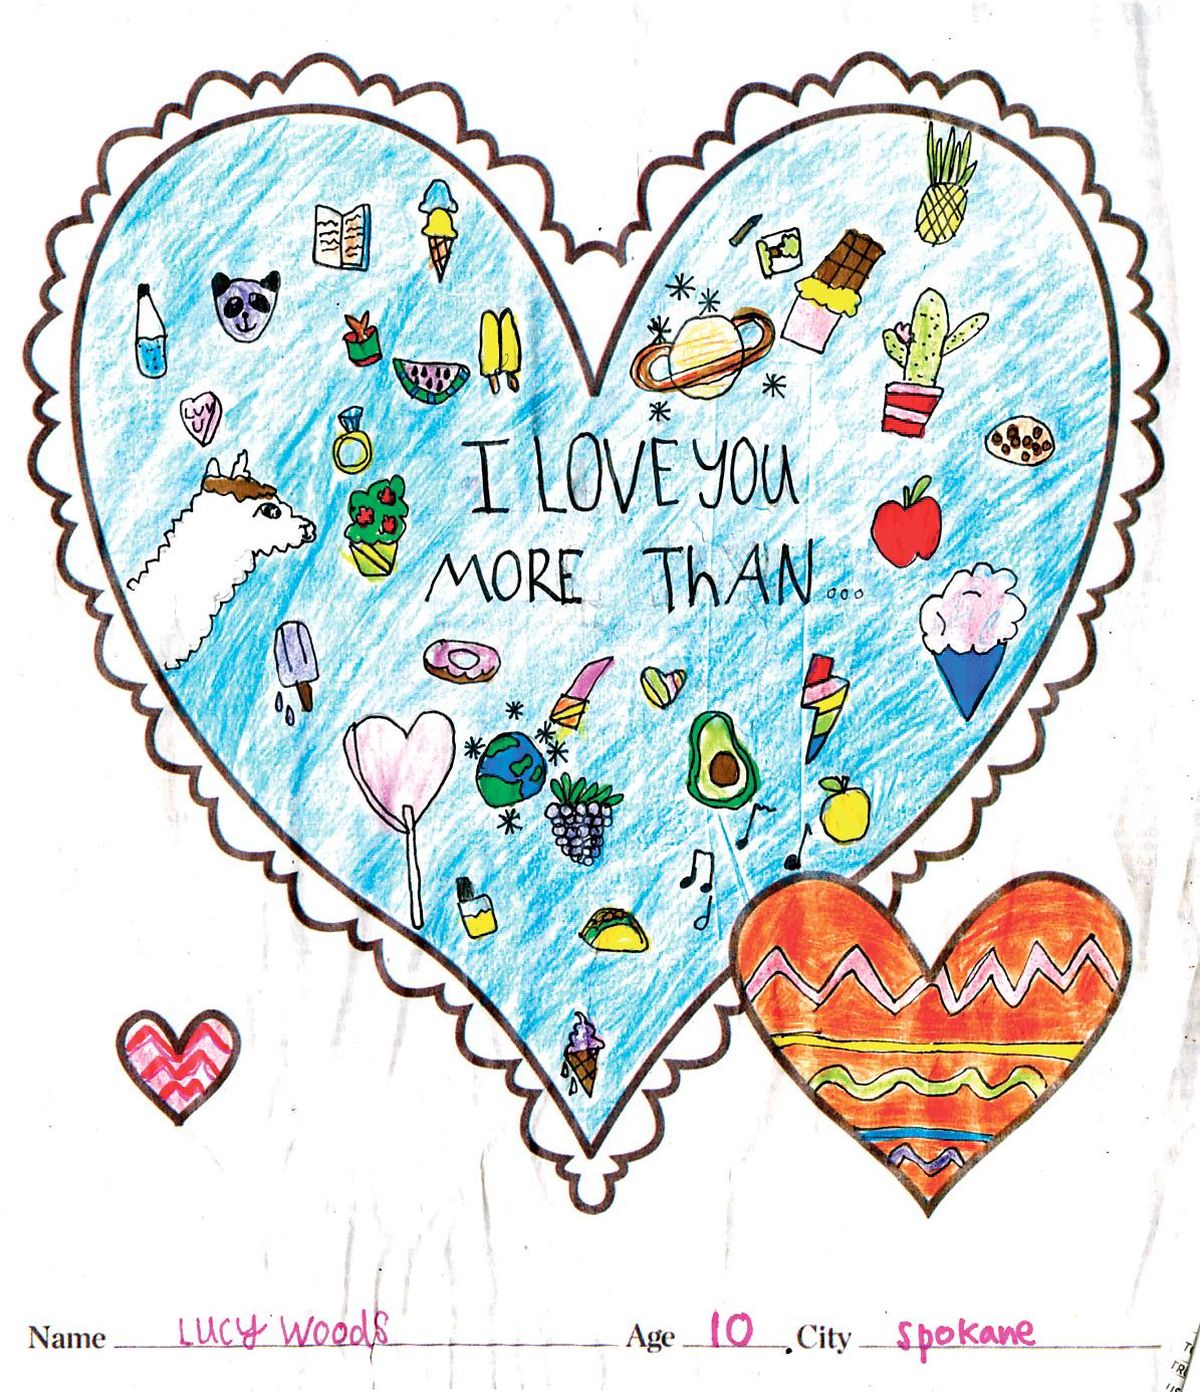 “I love you more than ...” was the theme of this winning heart from Lucy Woods, 10, of Spokane. She was among the young artists picked as winners of The Spokesman-Review’s annual Valentine’s Day coloring contest.